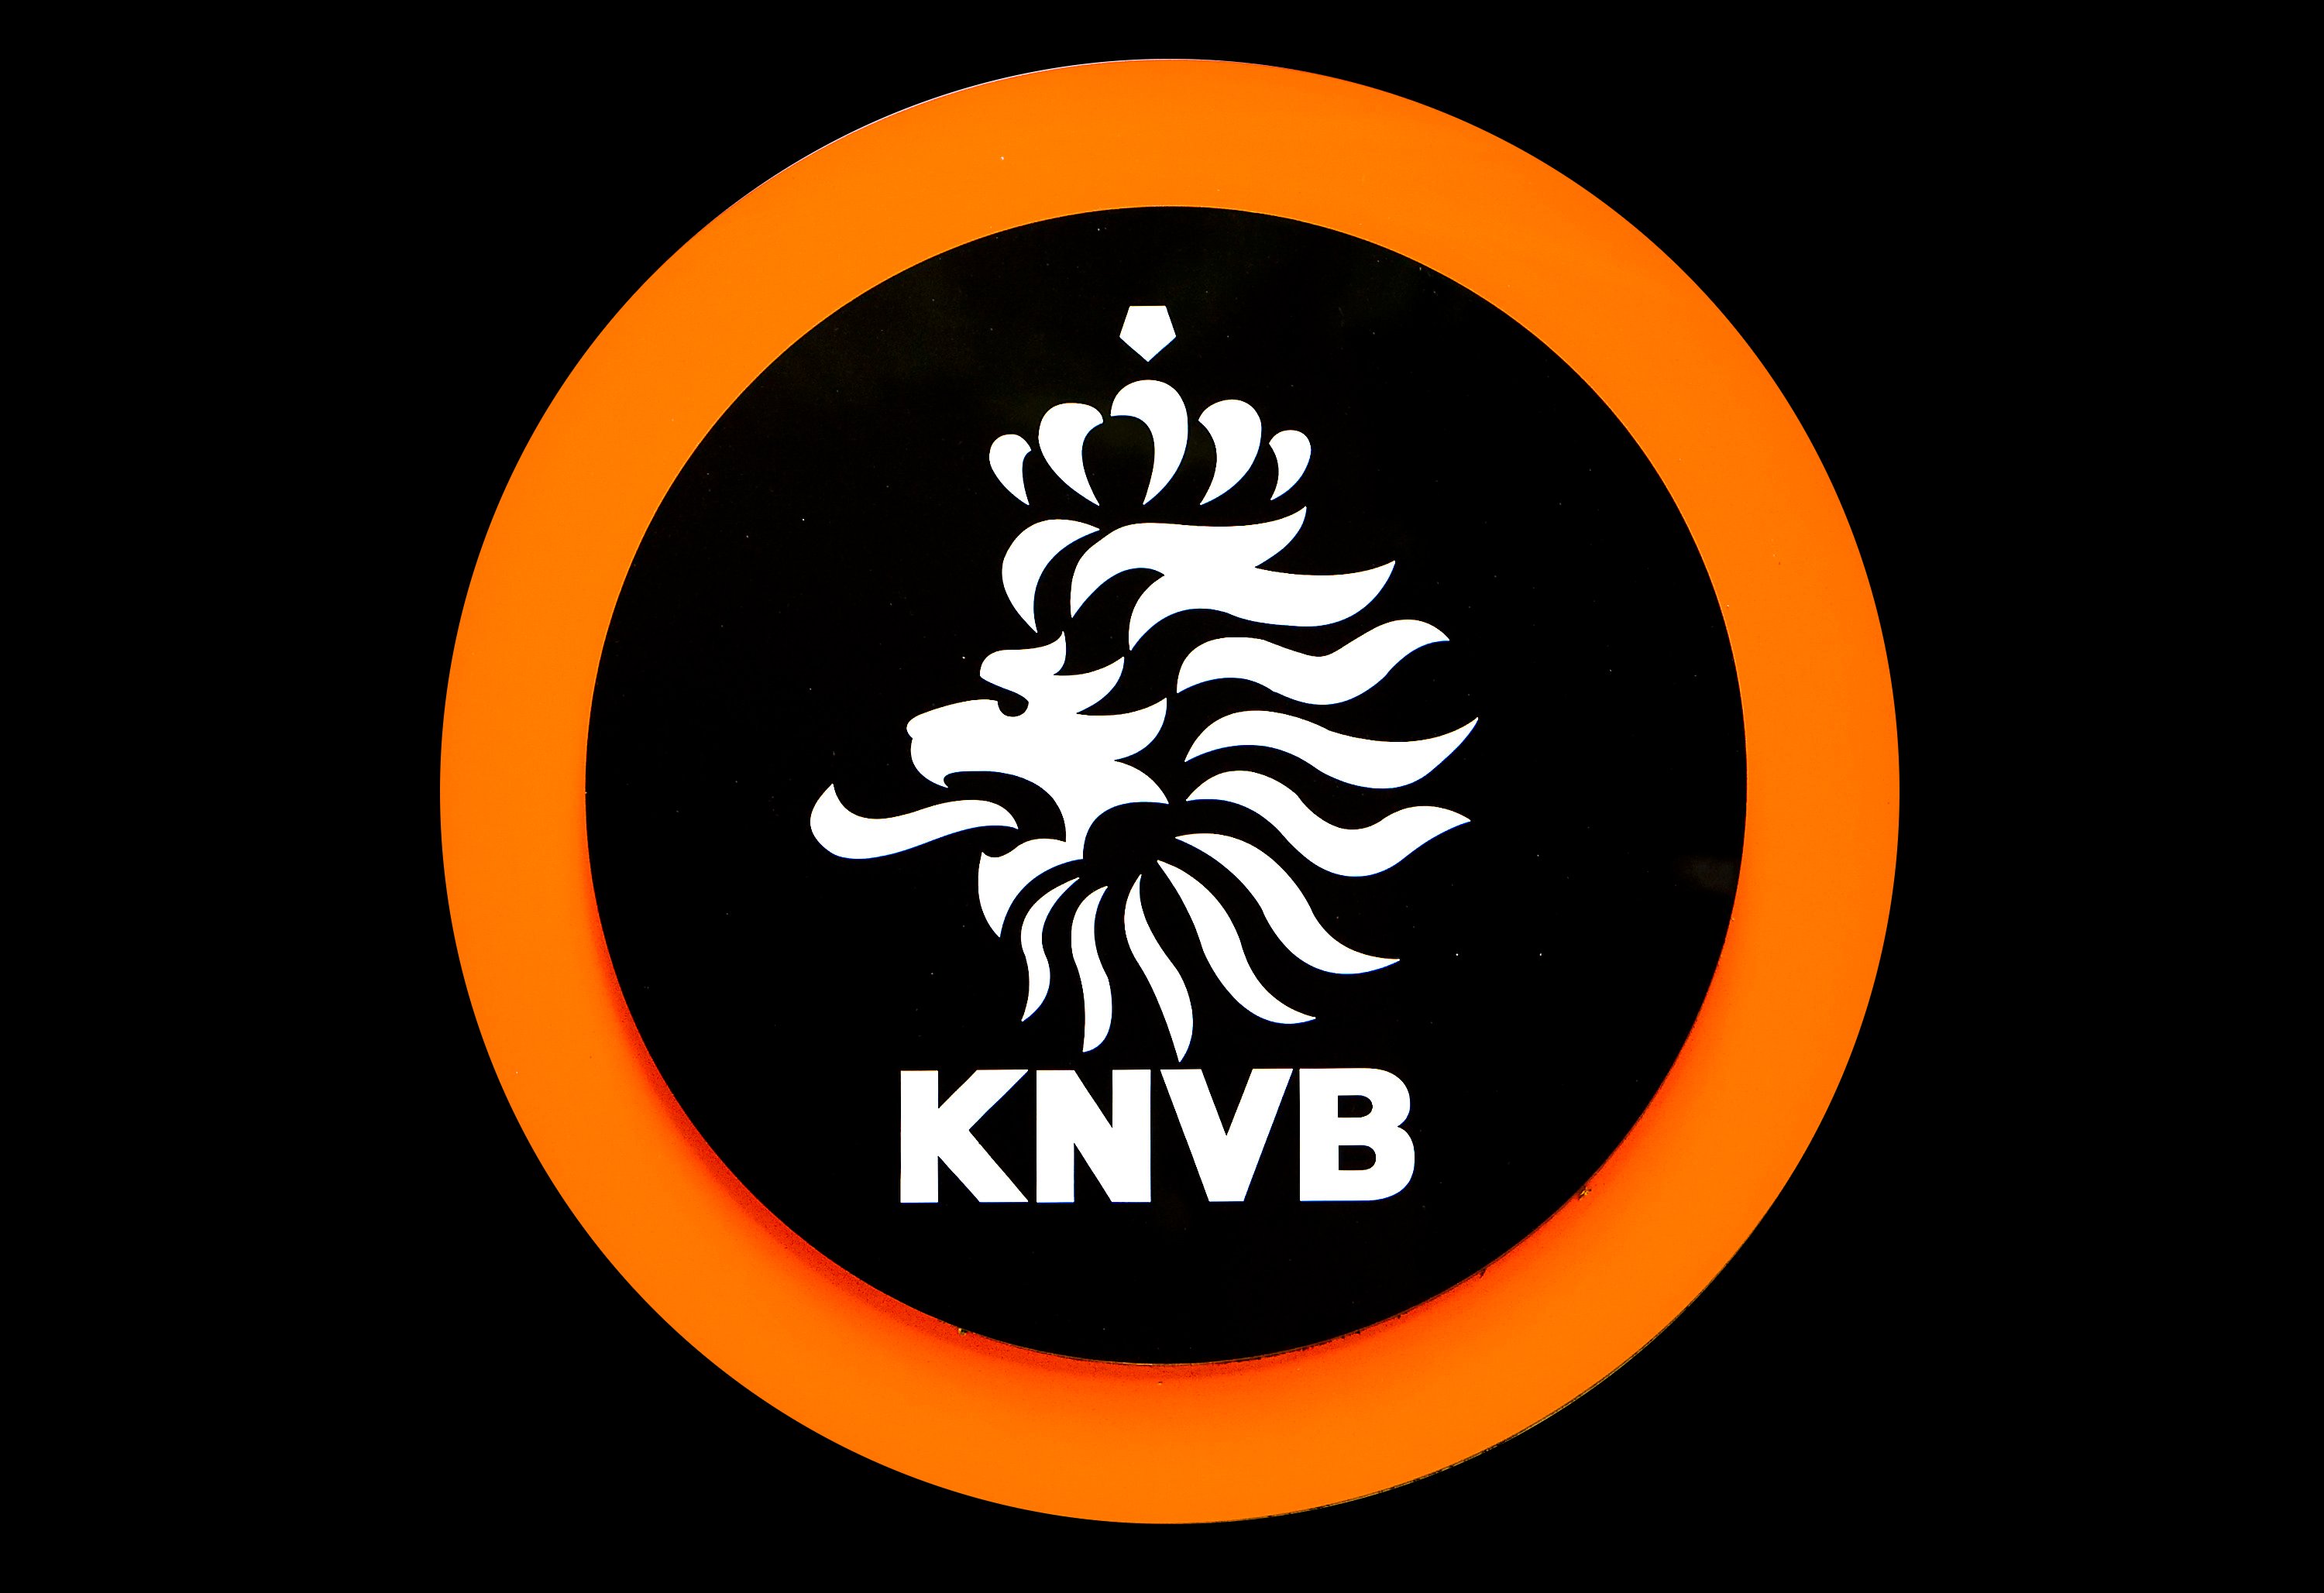 KNVB Background wallpaper by JoeyCreate - Download on ZEDGE™